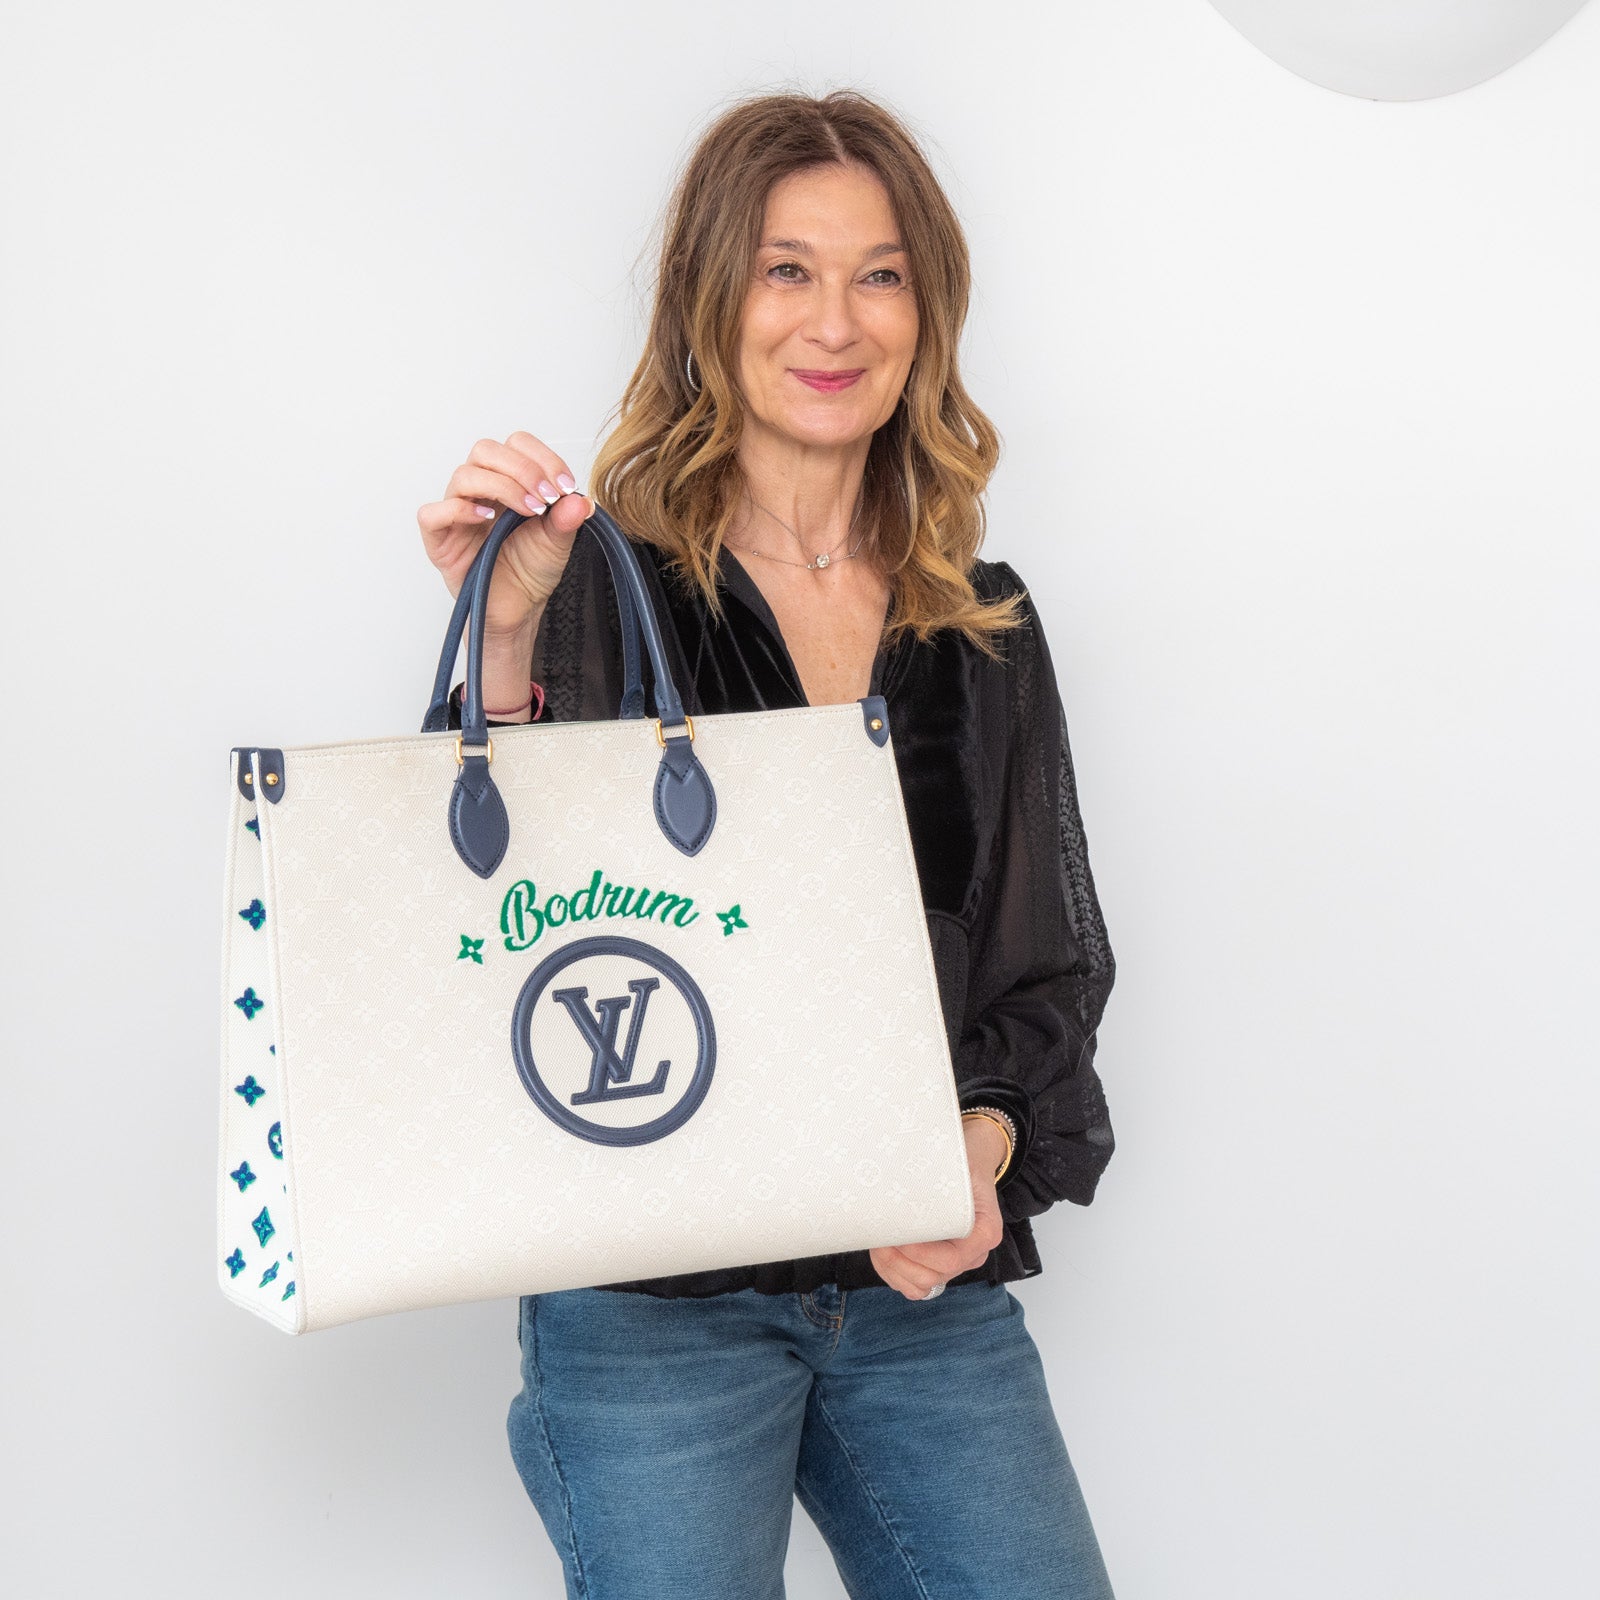 Louis Vuitton Bodrum On The Go Tote Bag - Image 11 of 11